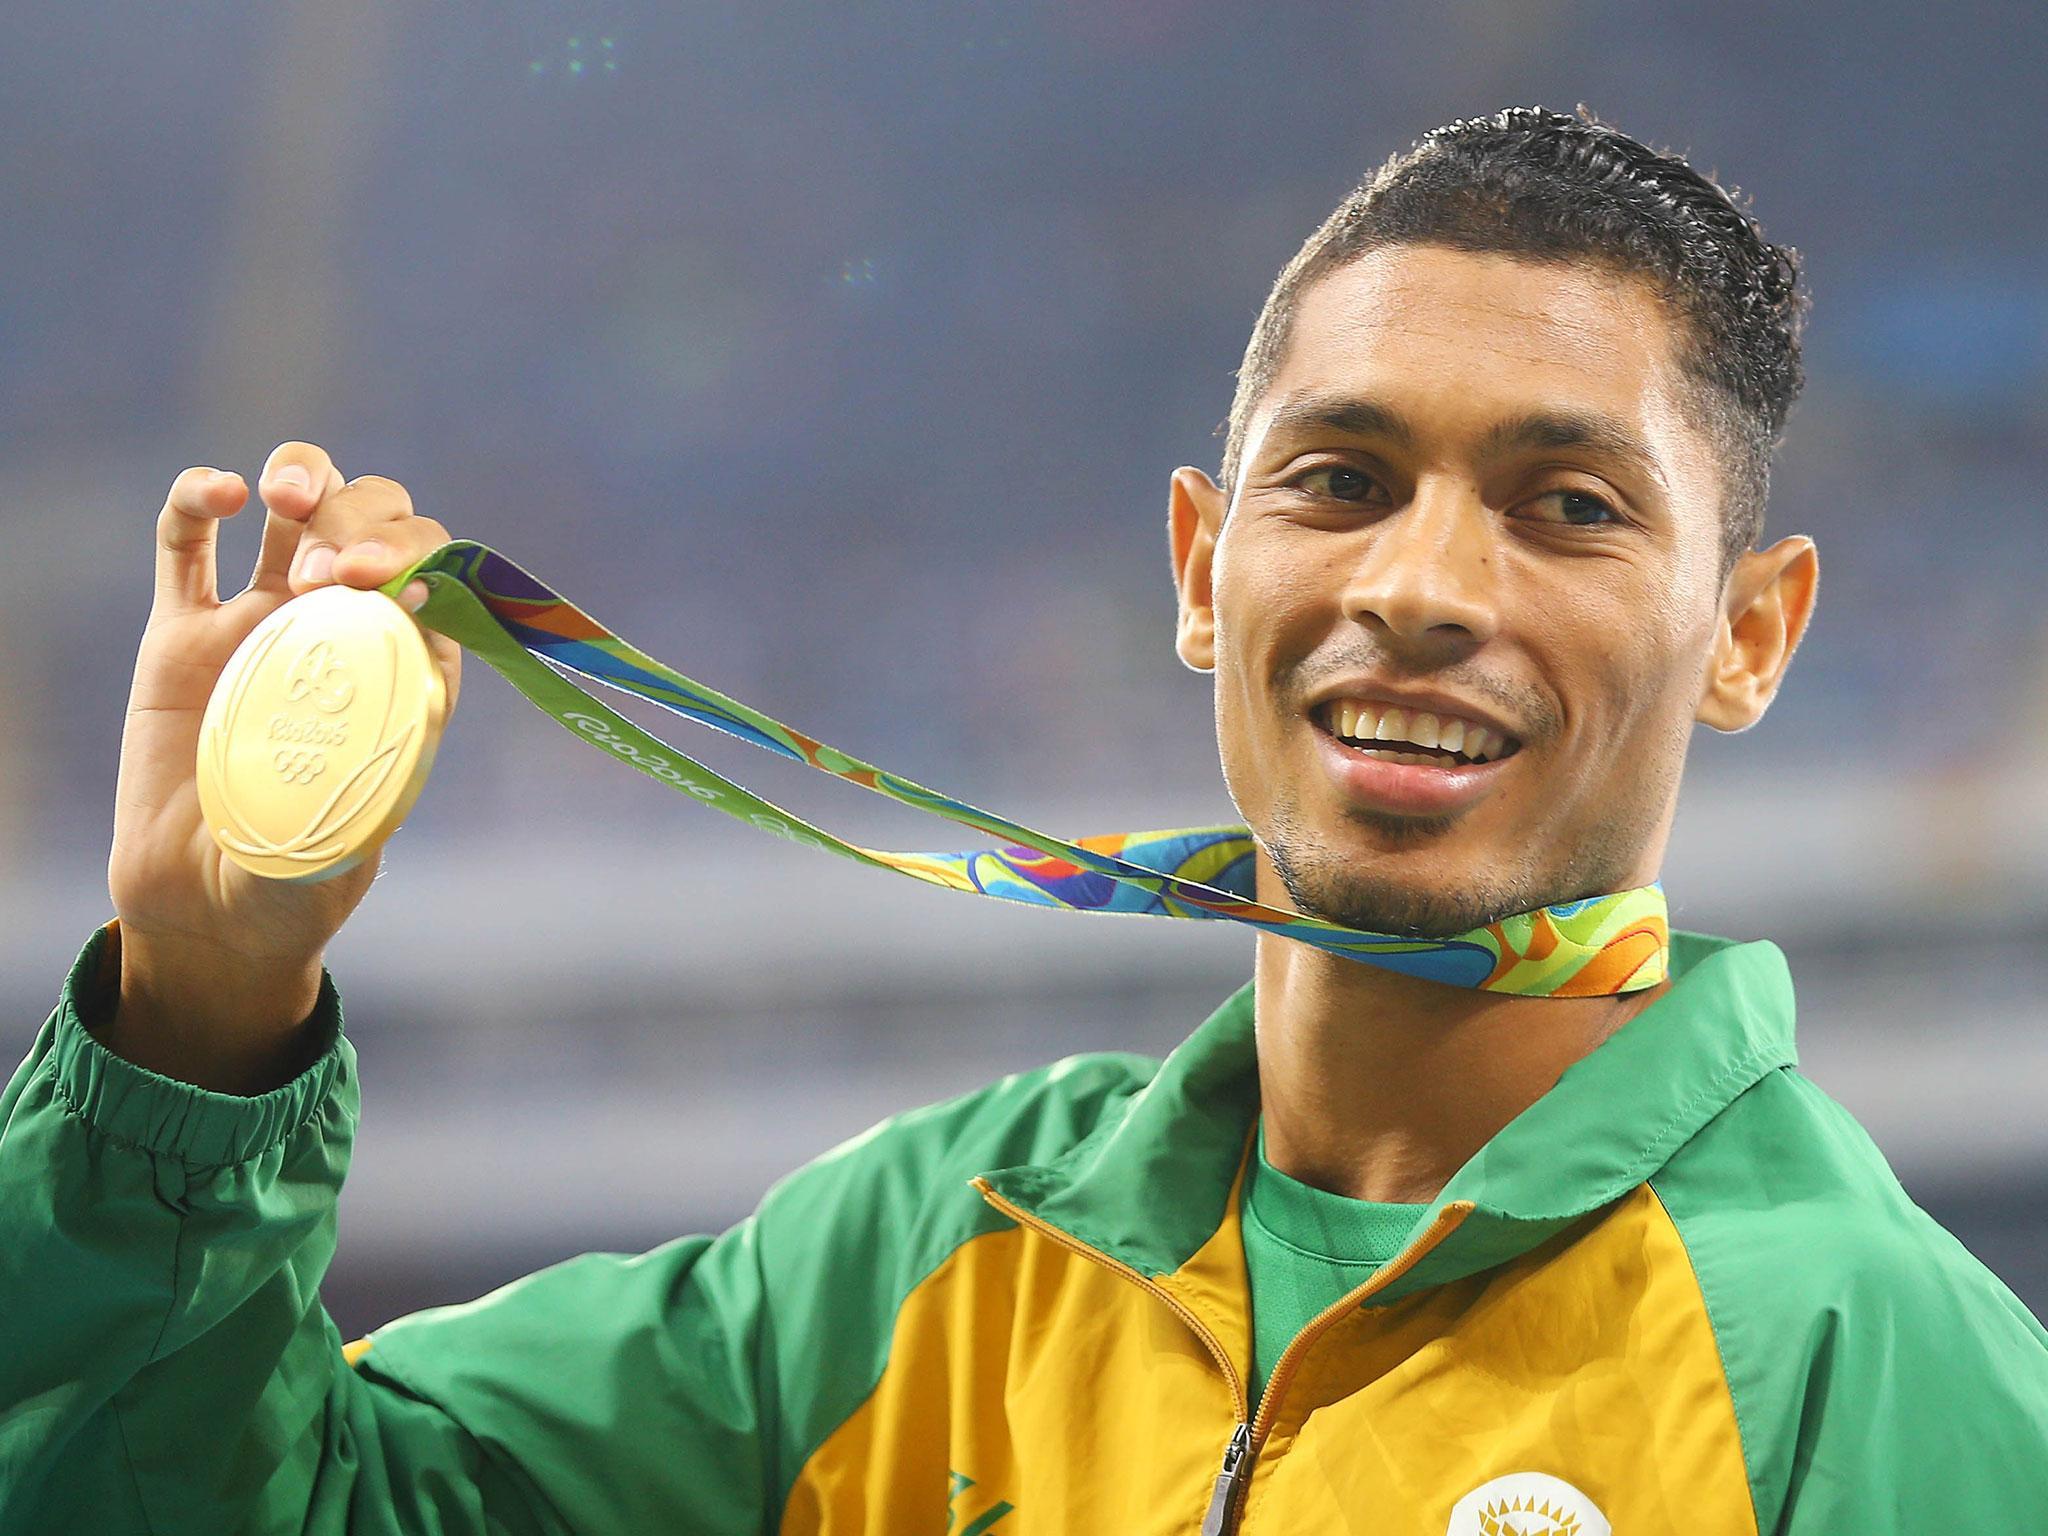 Gold medalist Wayde van Niekerk of South Africa poses with his medal after breaking the 400m world record